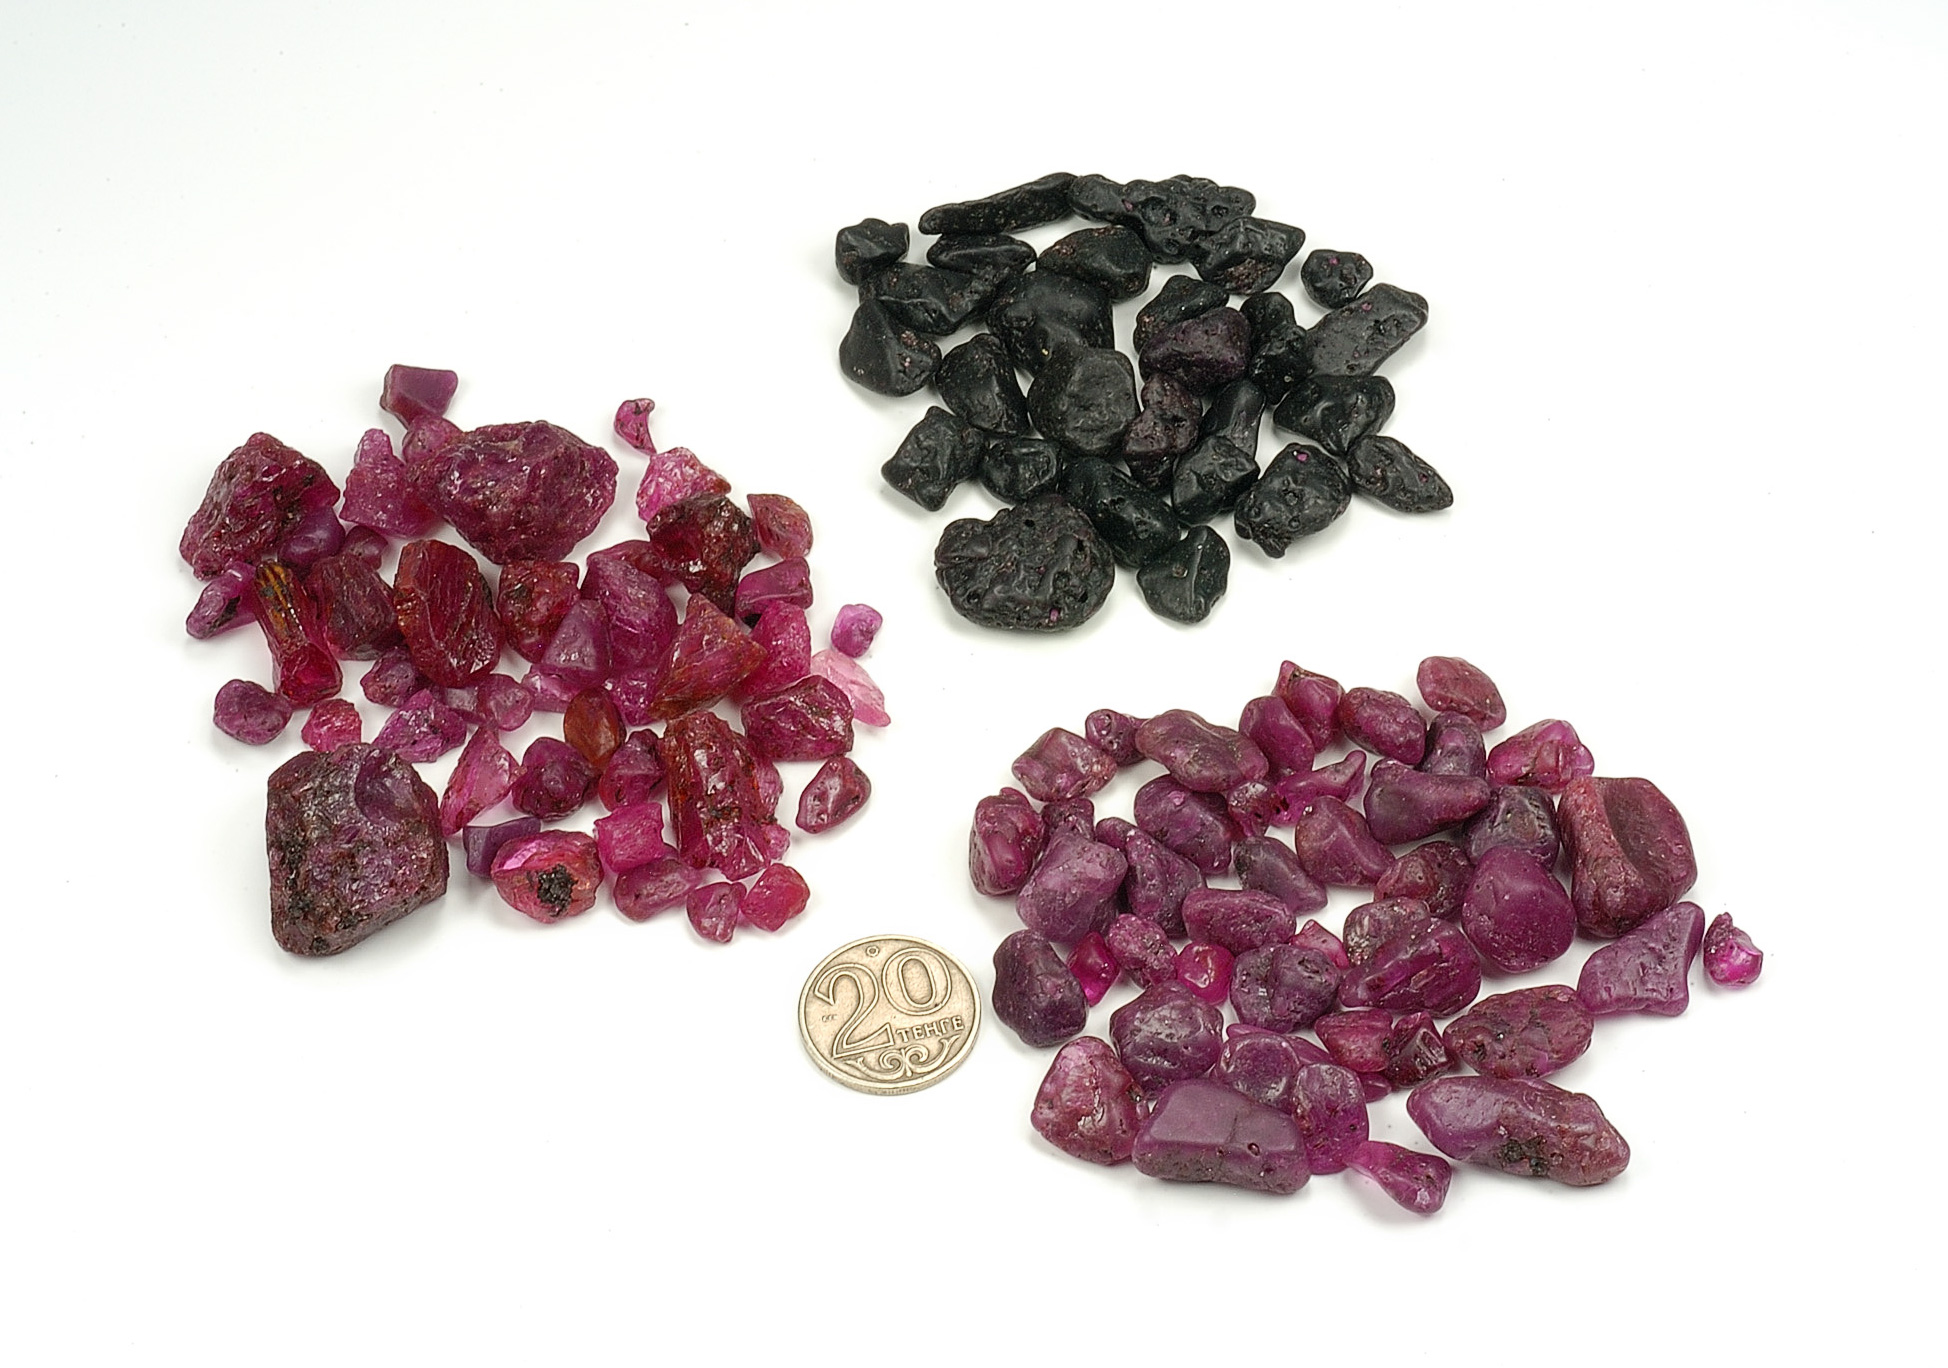 Three lots of "ruby" reputed to be from Tajikistan and obtained from a source in Tashkent, Uzbekistan. While the lower two are indeed ruby, the top lot proved to be dark red garnet. Photo: Wimon Manorotkul/Pala International